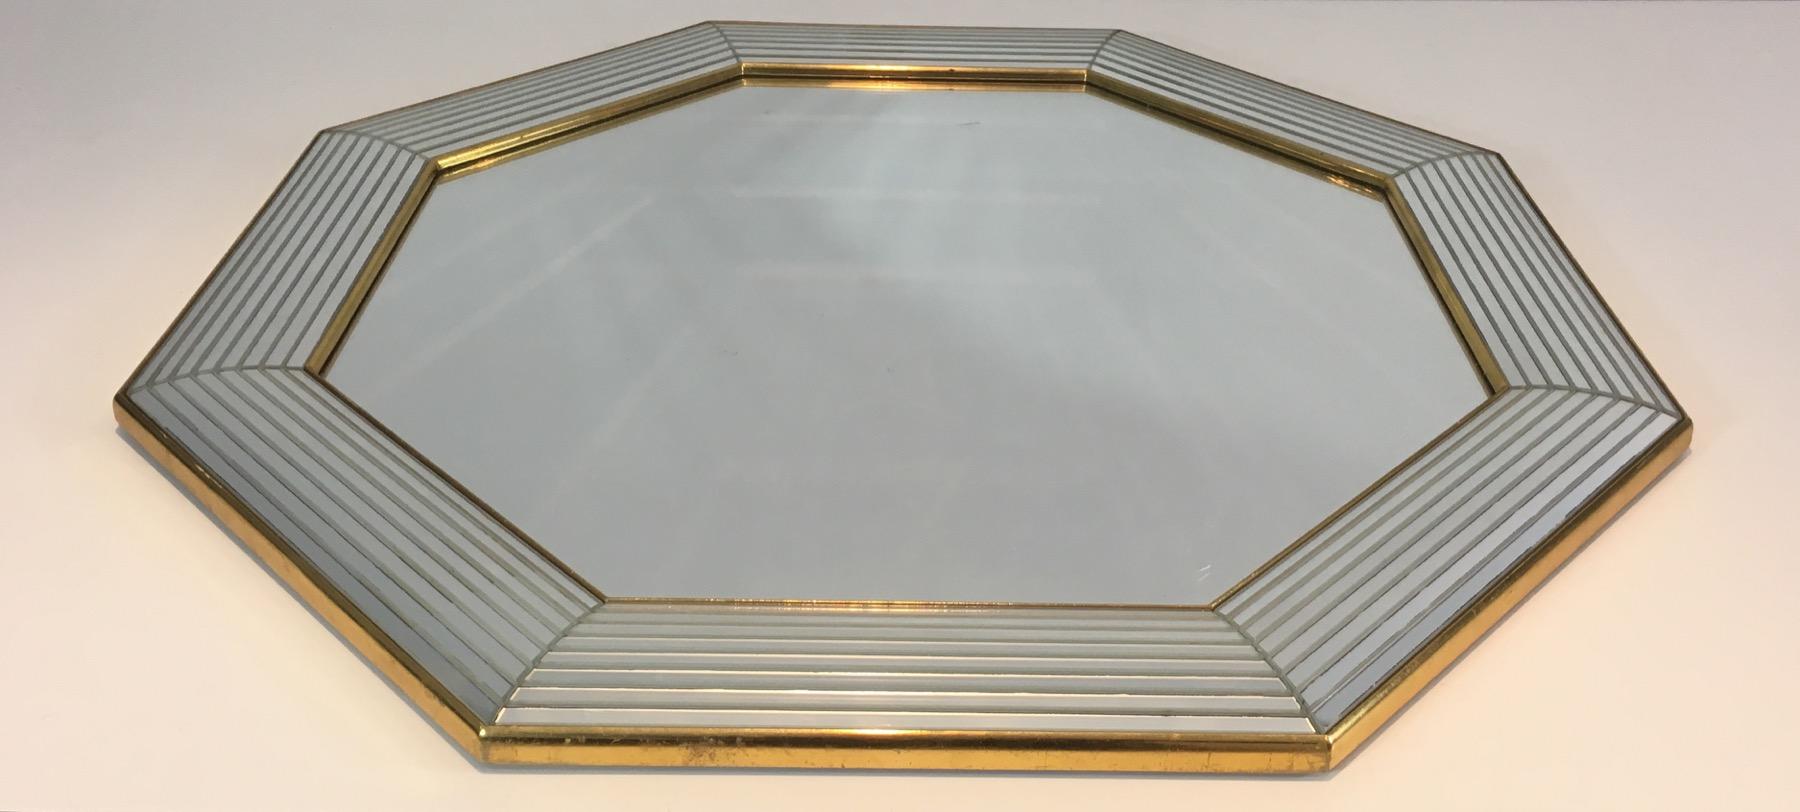 Late 20th Century Octagonal Mirror with Lucite on the Sides, French, circa 1970